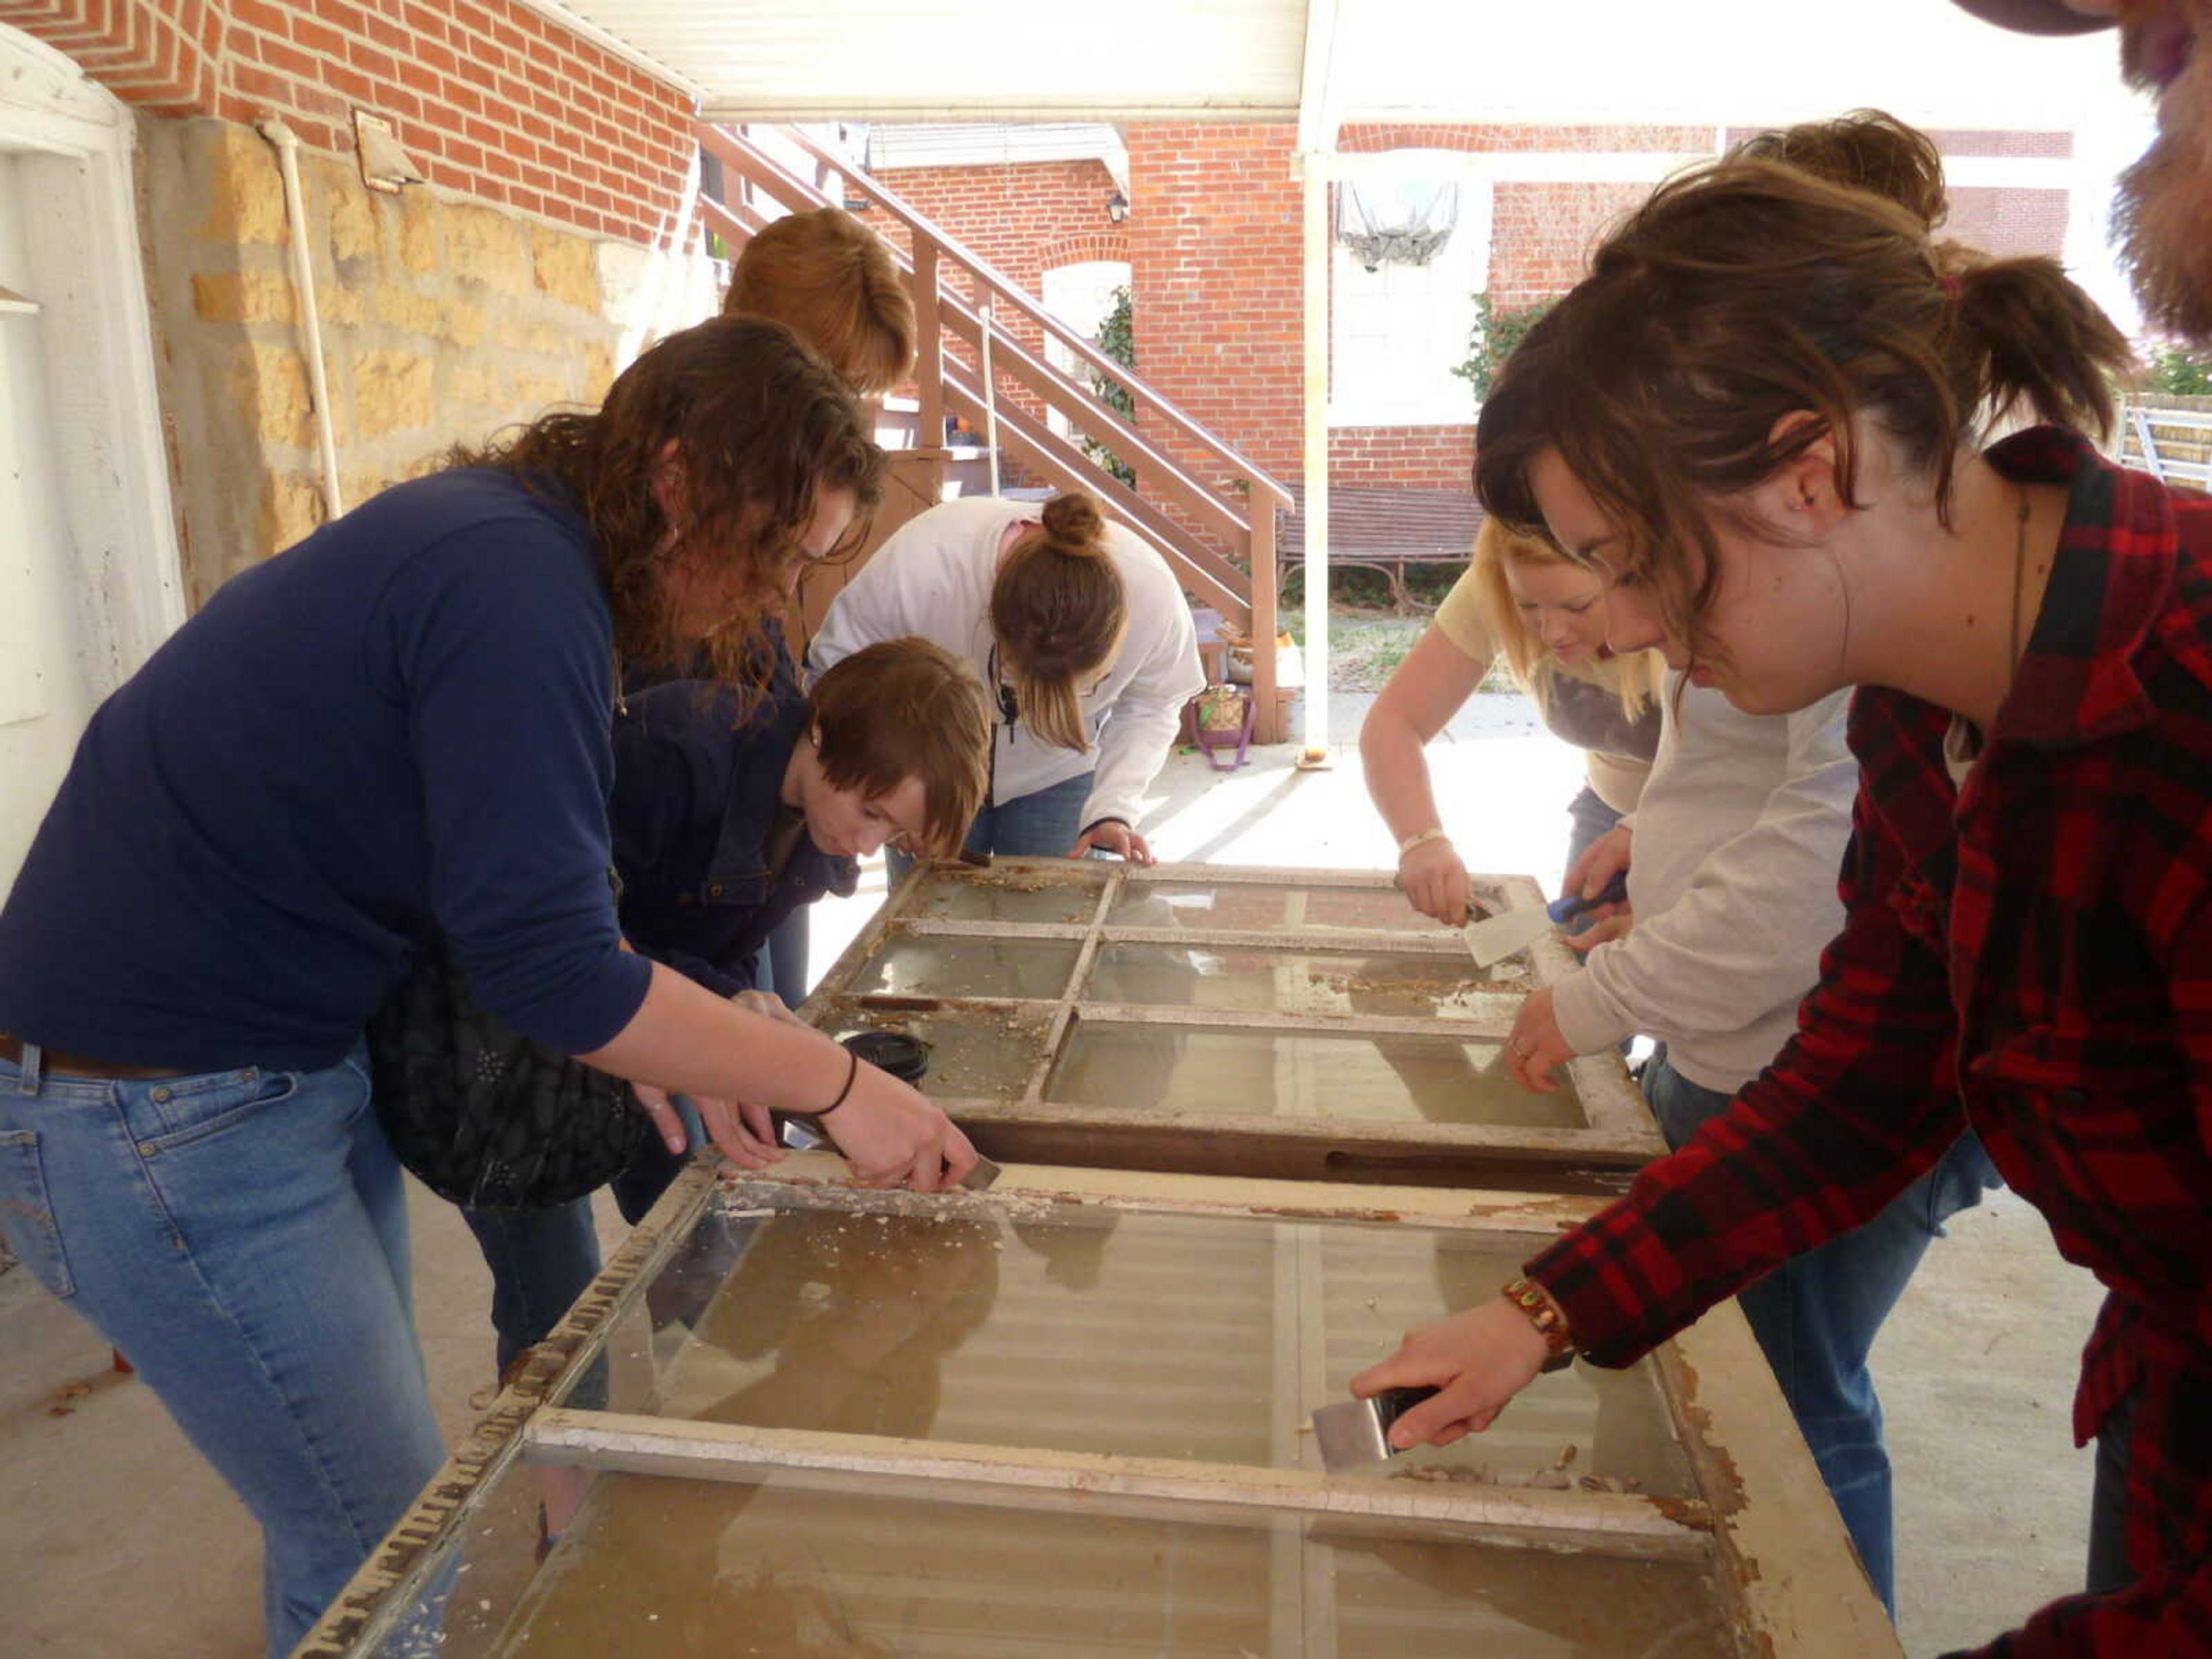 Historic preservation students learn how to remove and replace old window panes in the Historic Window Workshop. - Submitted photo